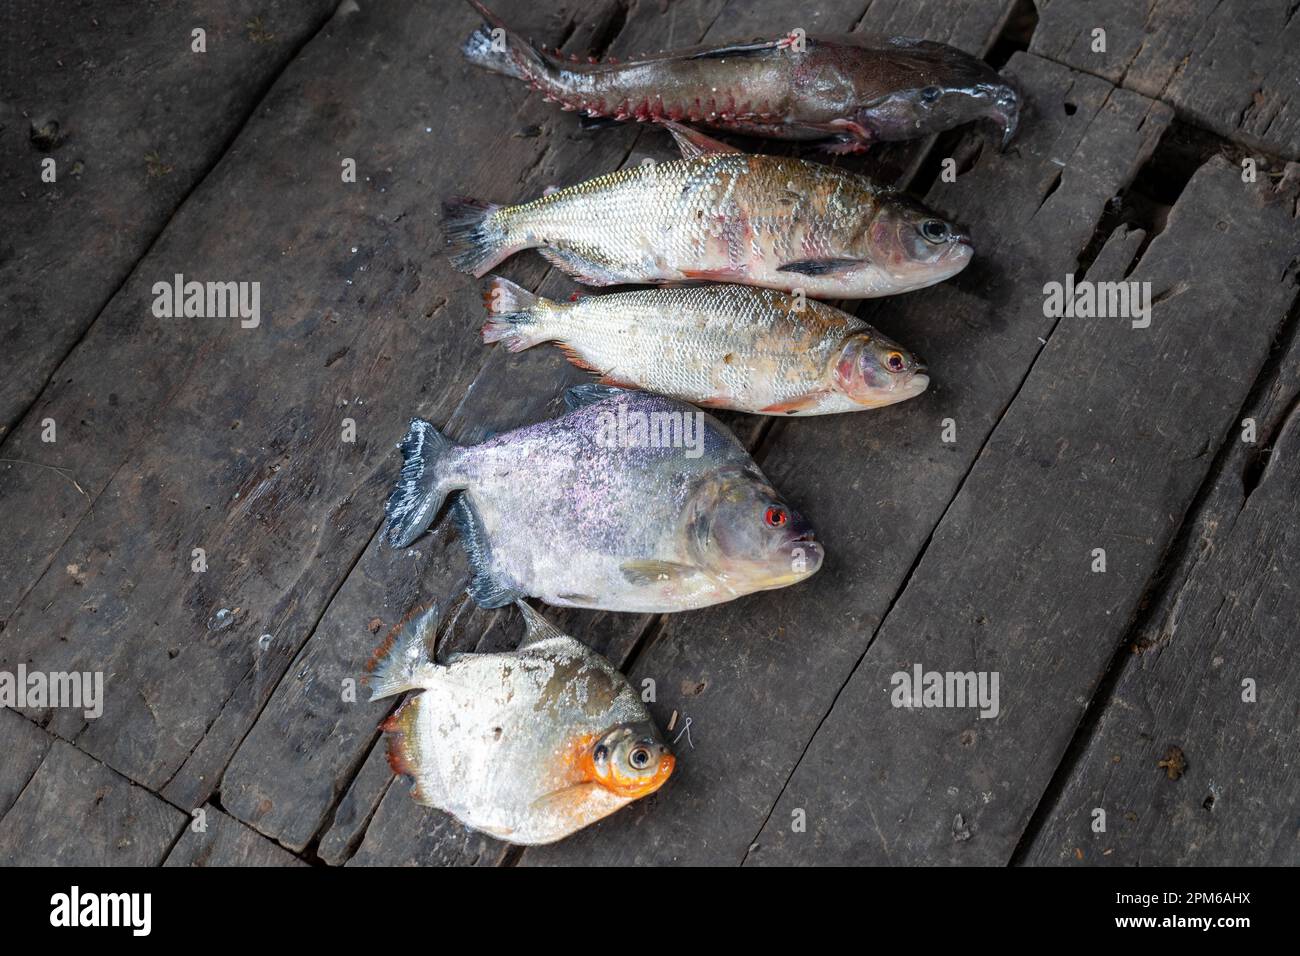 Morning catch of fish from the Amazon River in Peru Stock Photo